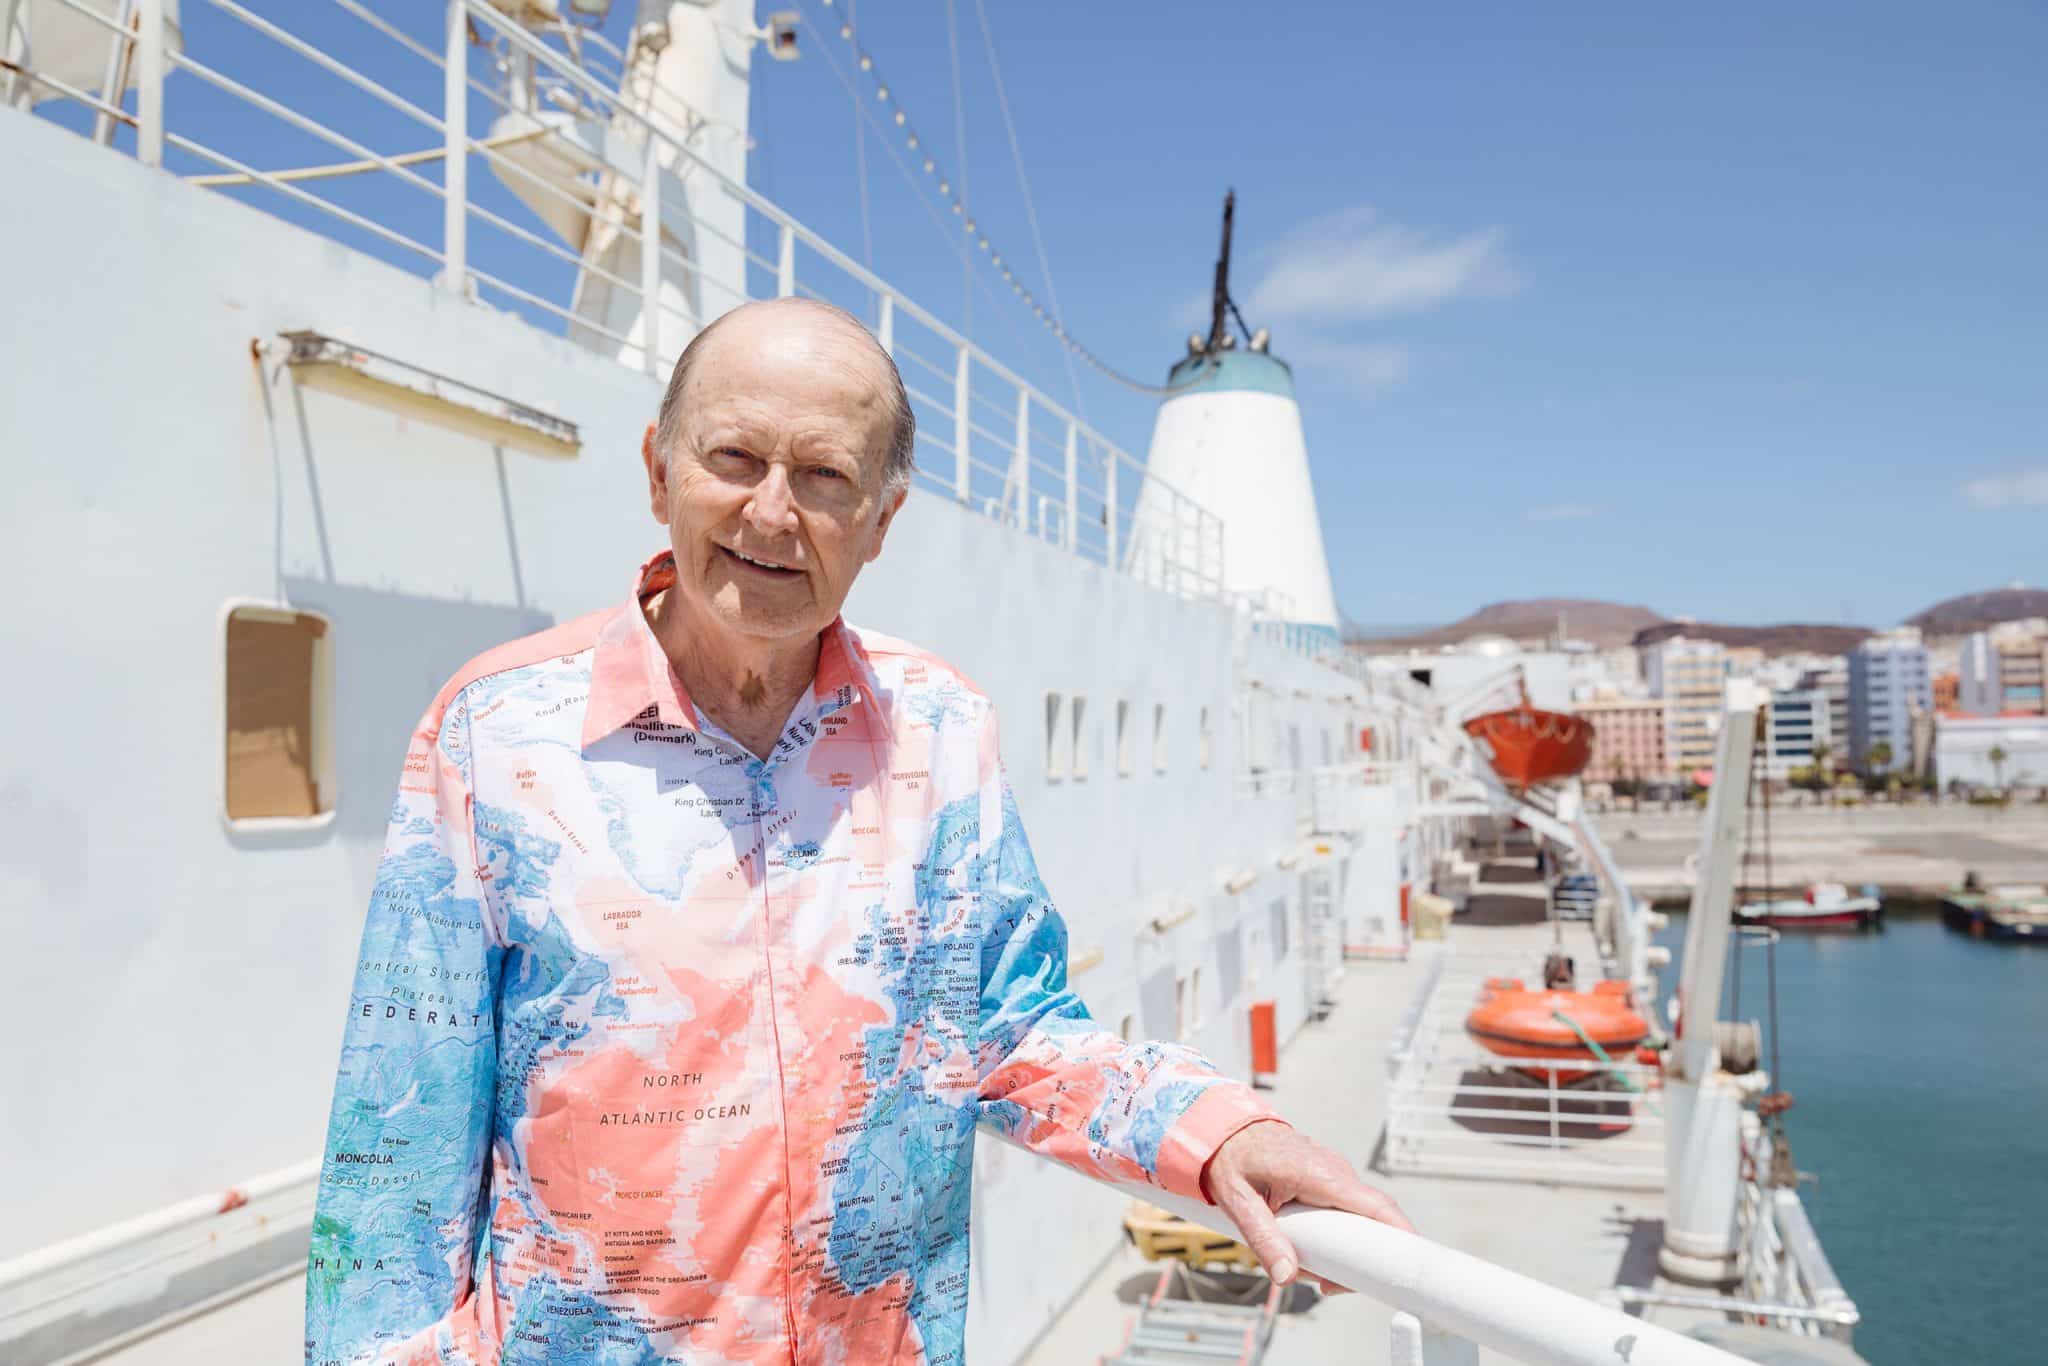 The founder of Operation Mobilisation, George Verwer, on board the Logos Hope in the Canary Islands in 2022. Photo courtesy OM.